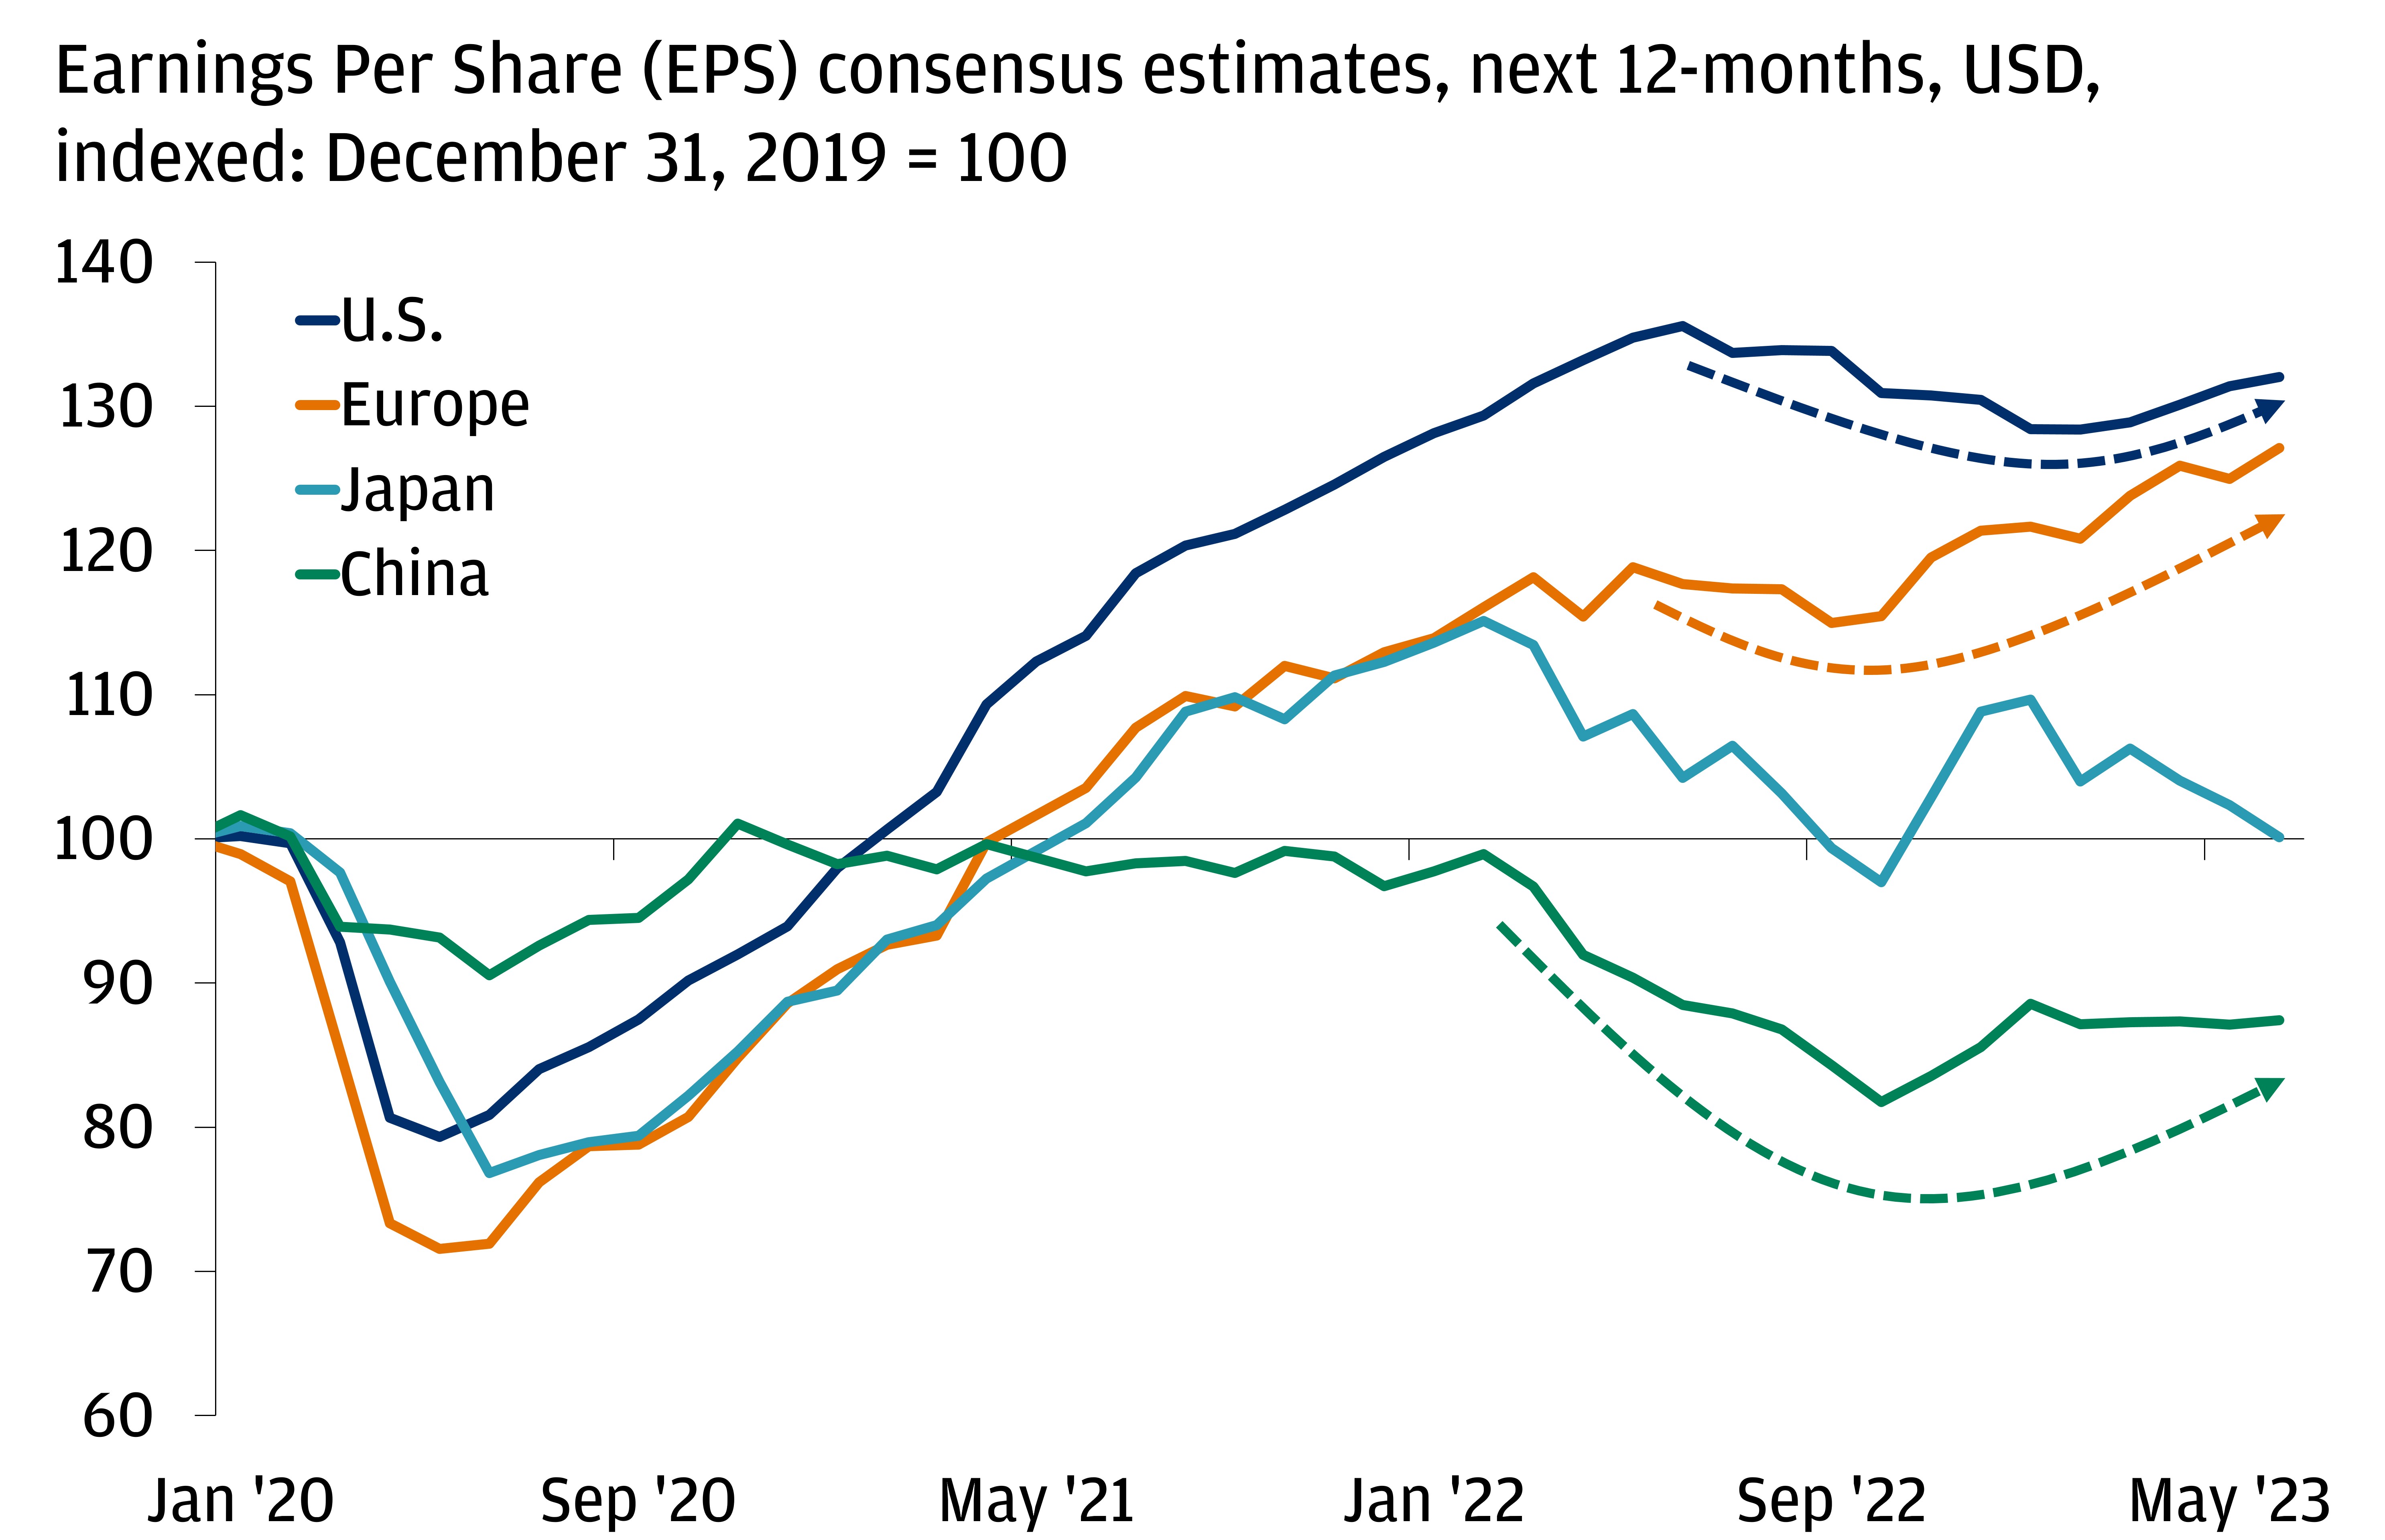 This chart shows the next 12 months earnings per share (EPS) consensus estimates in U.S. dollars for the U.S. (S&P 500), Europe (Stoxx Europe 600), Japan (TOPIX) and China (MSCI China), indexed to December 31, 2019.